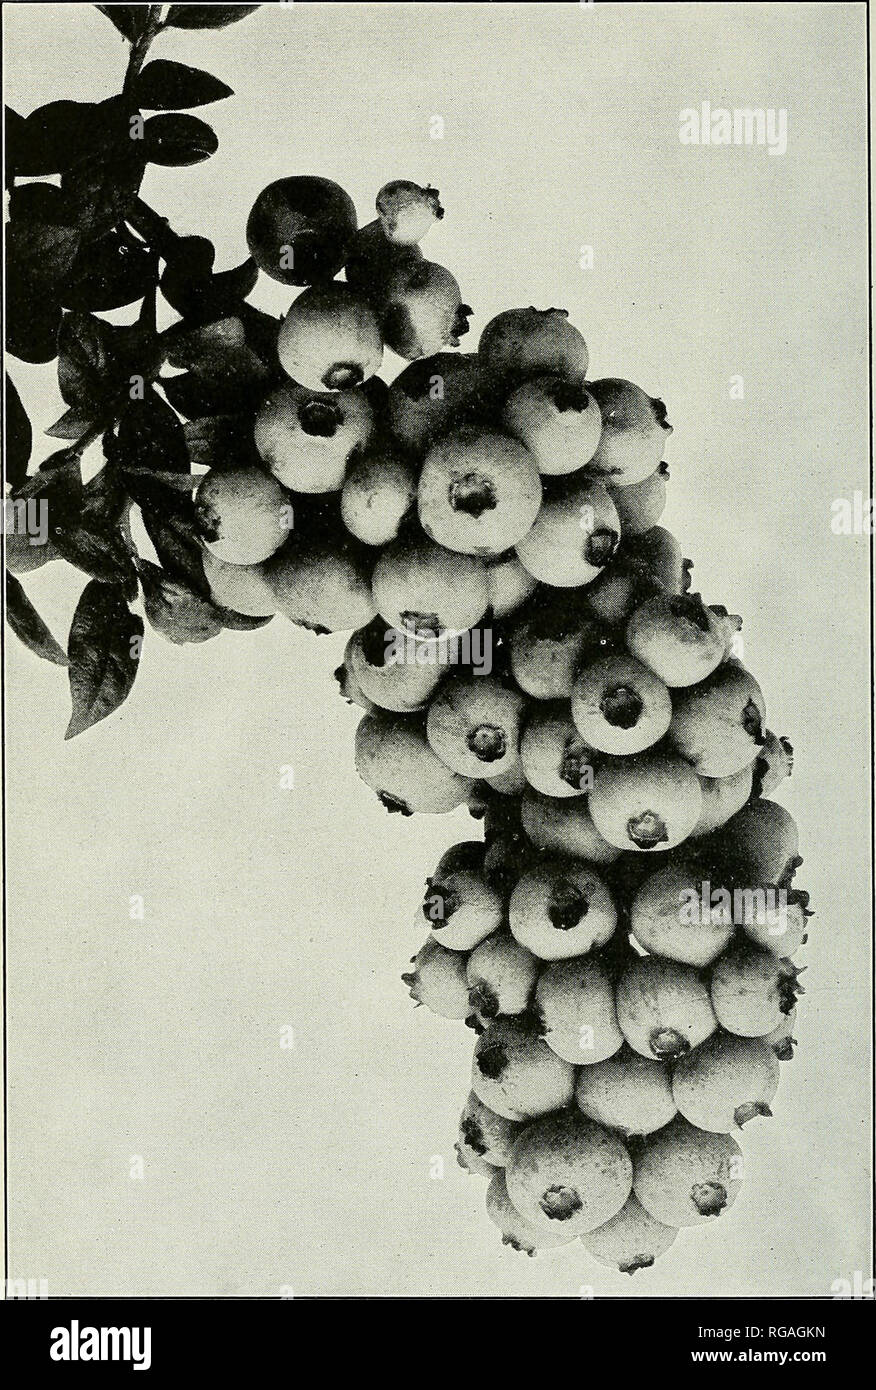 . Bulletin of the U.S. Department of Agriculture. Agriculture; Agriculture. Bui. 974, U. S. Dept. of Agriculture. Plate XXVI.. Handsome Cluster of Blueberries from a Rejected Hybrid. Among the thousands of hybrids fruited at Whitesbog, N. J., hundreds produce berries as large and as handsome as these, yet although they are superior to all wild berries except the very best they are not regarded as of sufficiently high quality to merit selection and propagation when judged from the high standard set for hybrid blueberries. However, from tmselected hybrid bushes of this class a yield of berries w Stock Photo